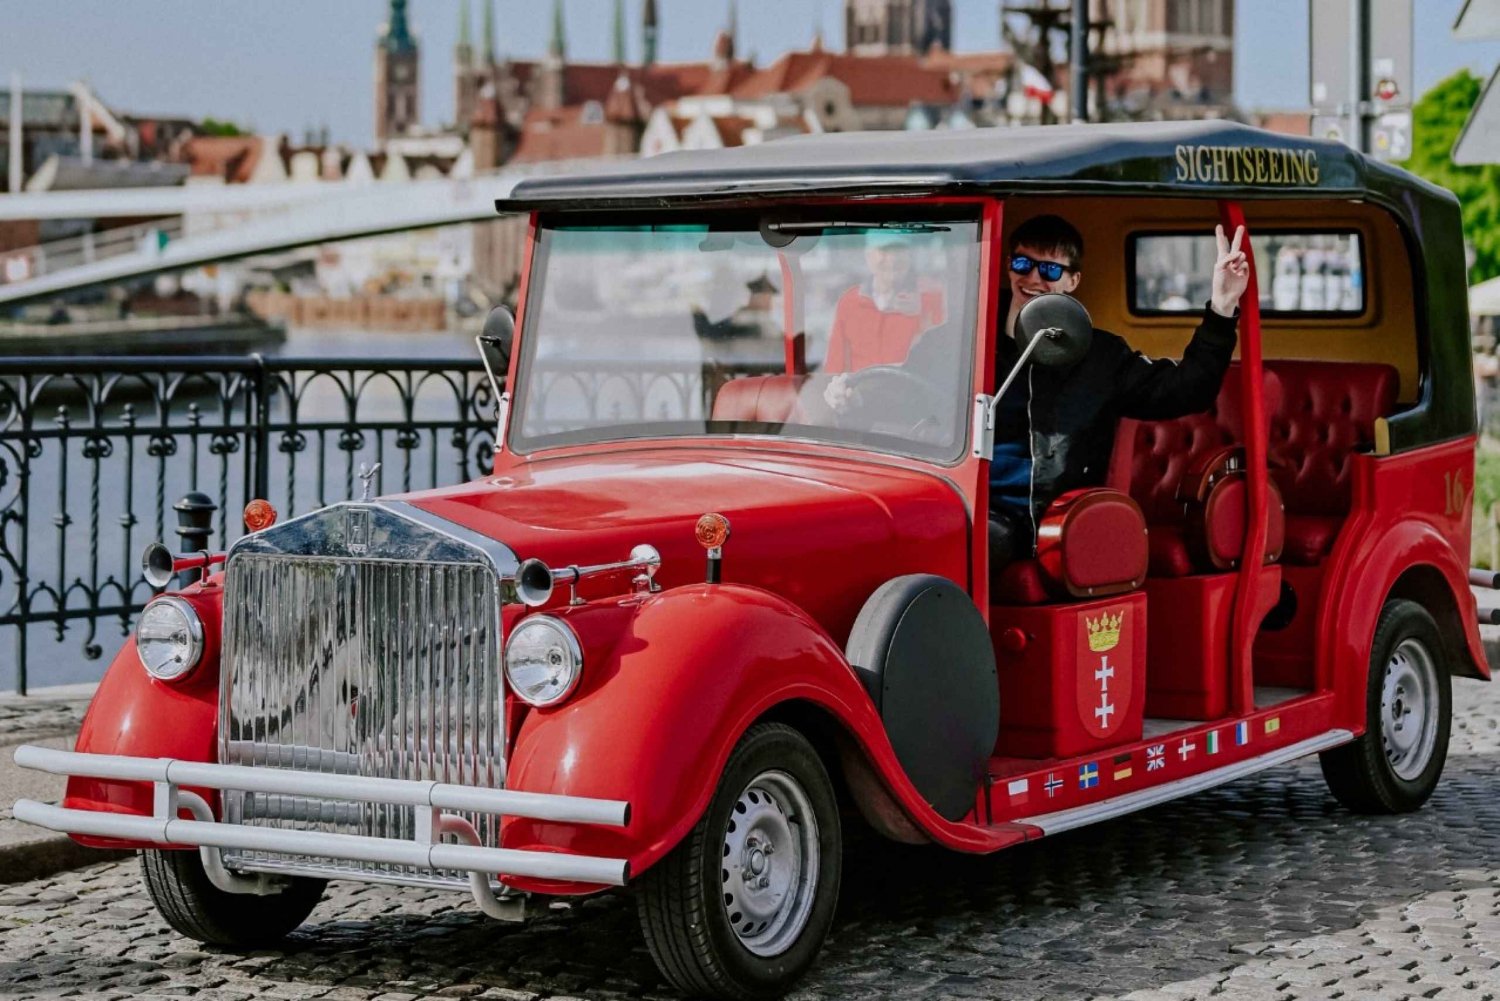 Reservation for sightseeing in retro cars, Gdansk